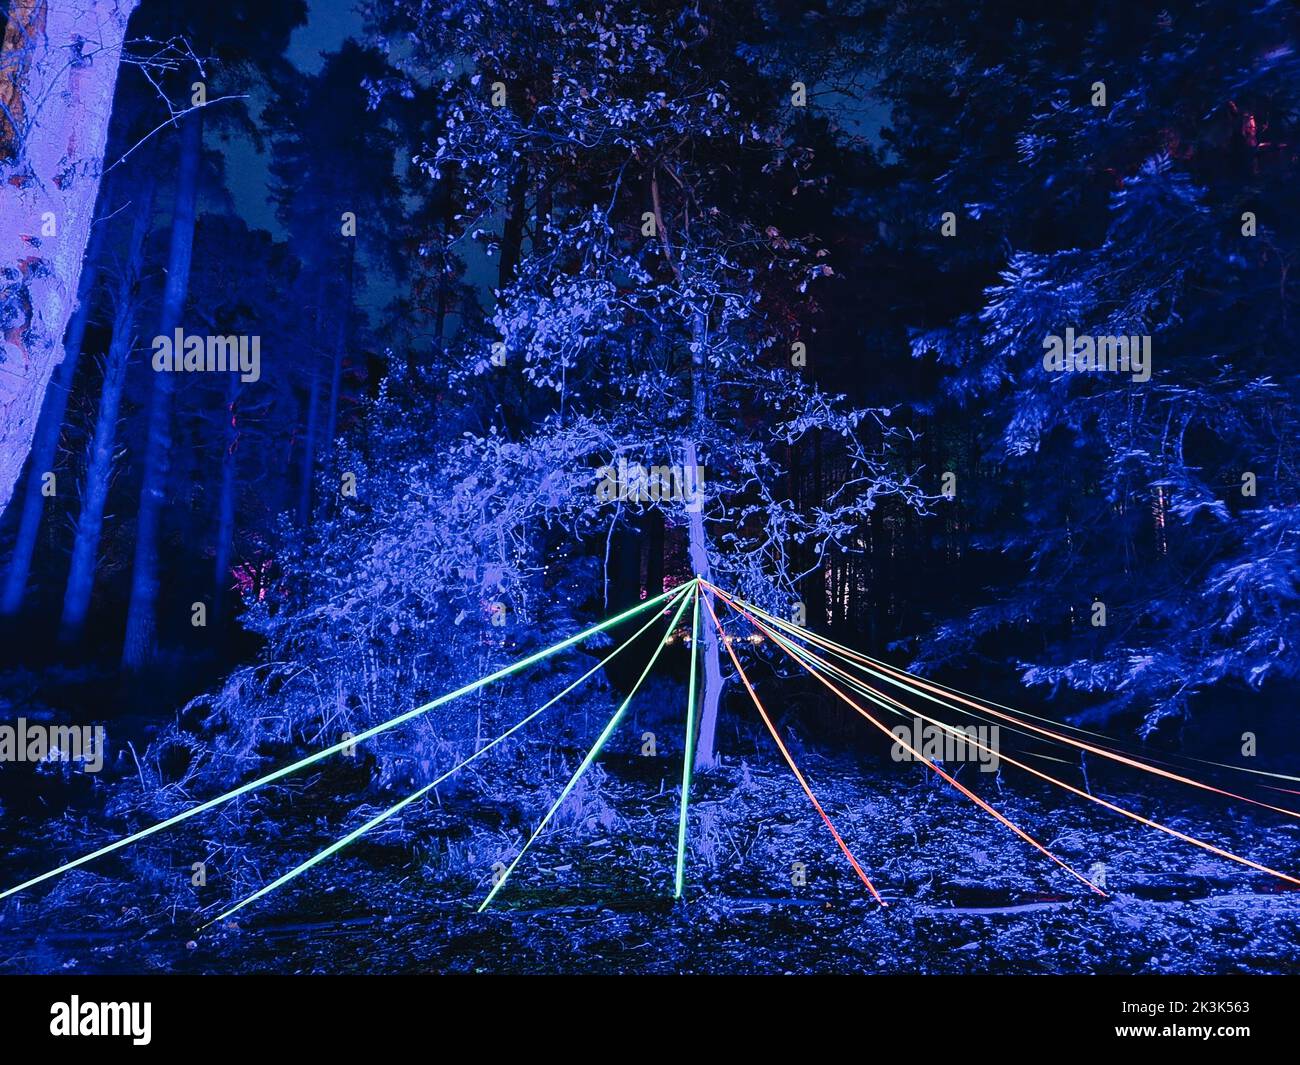 The neon light trails in the woods at night for a festival celebration Stock Photo